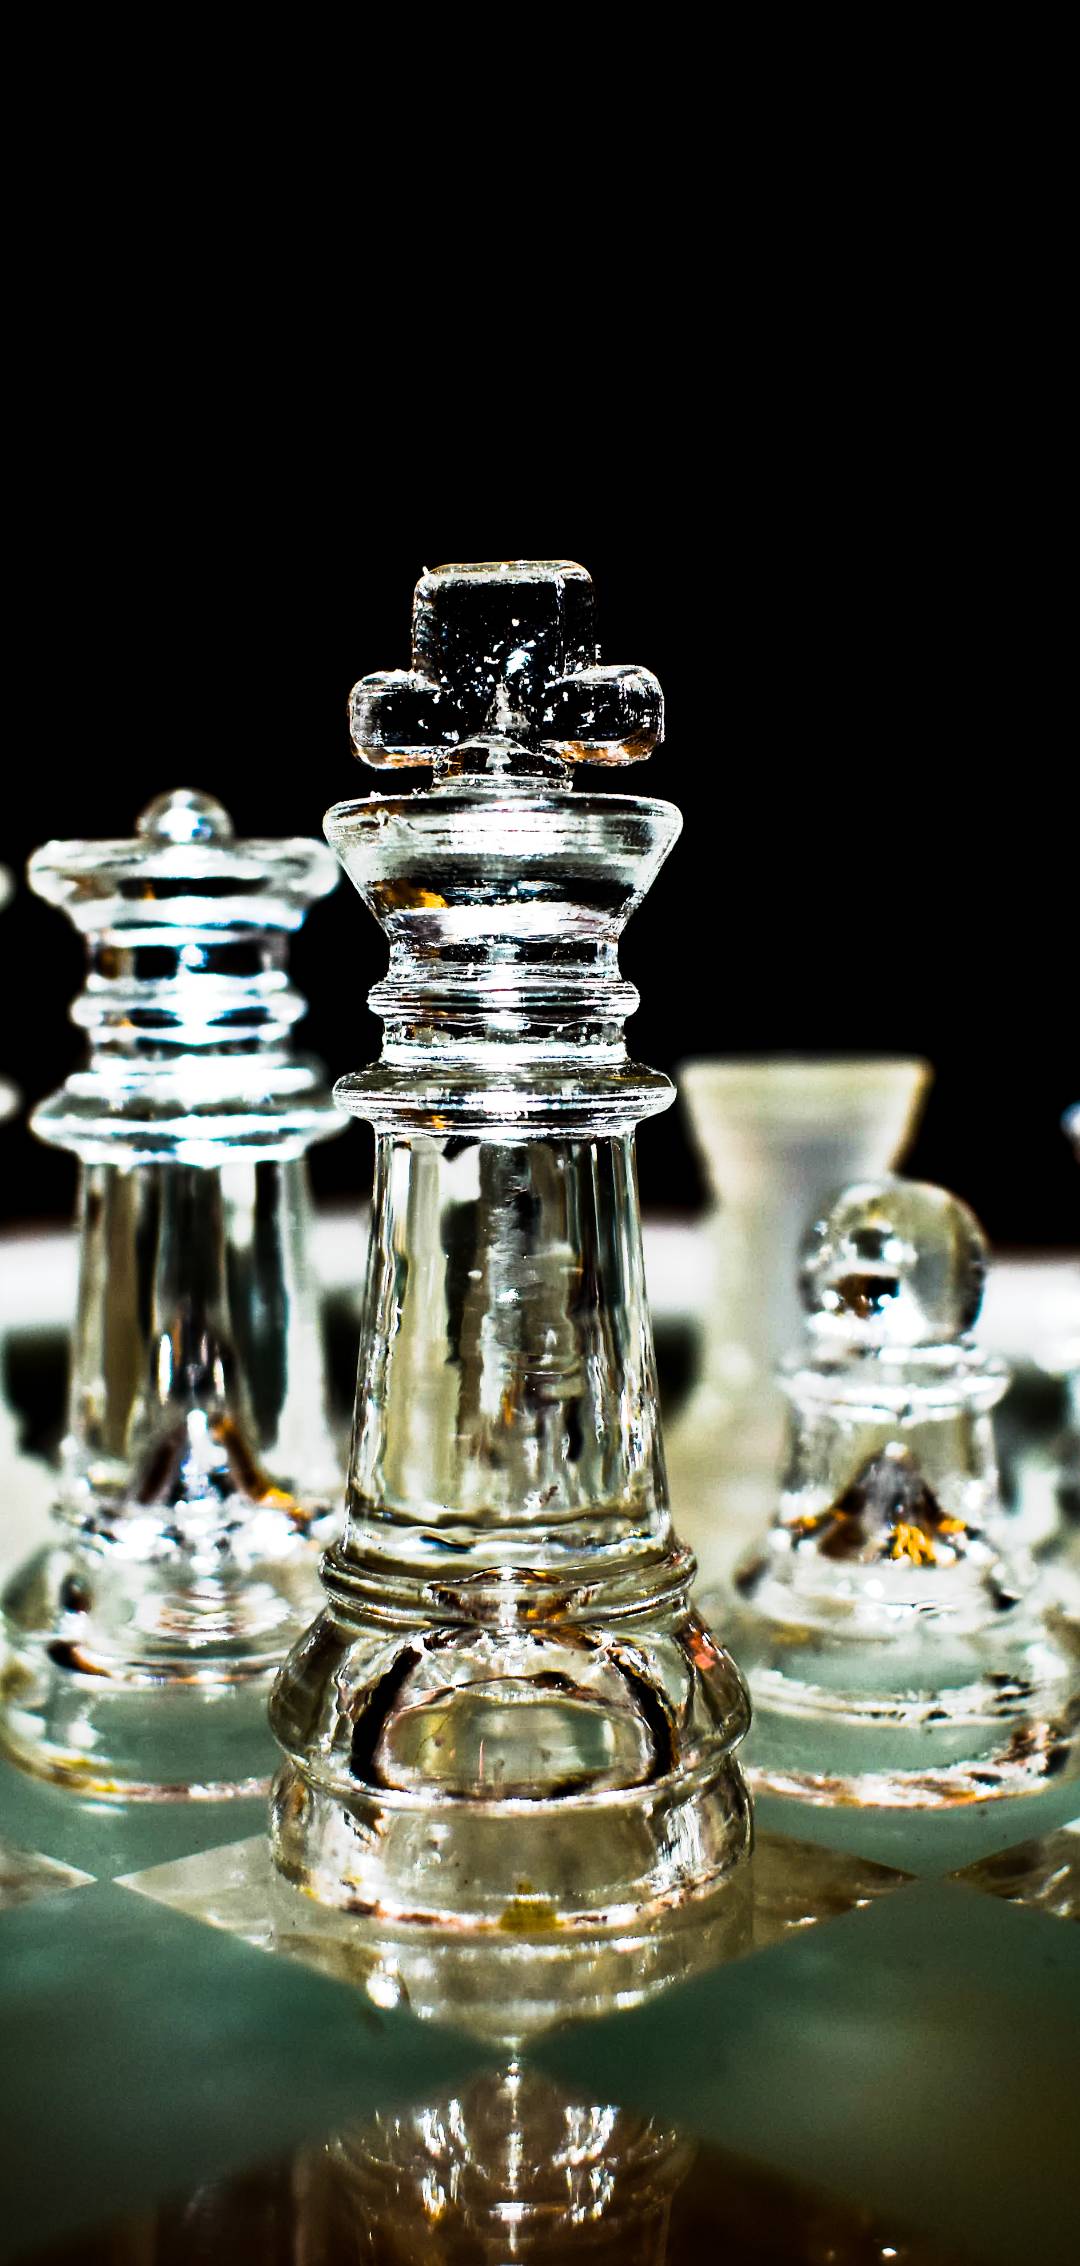 Chess pieces made of glass